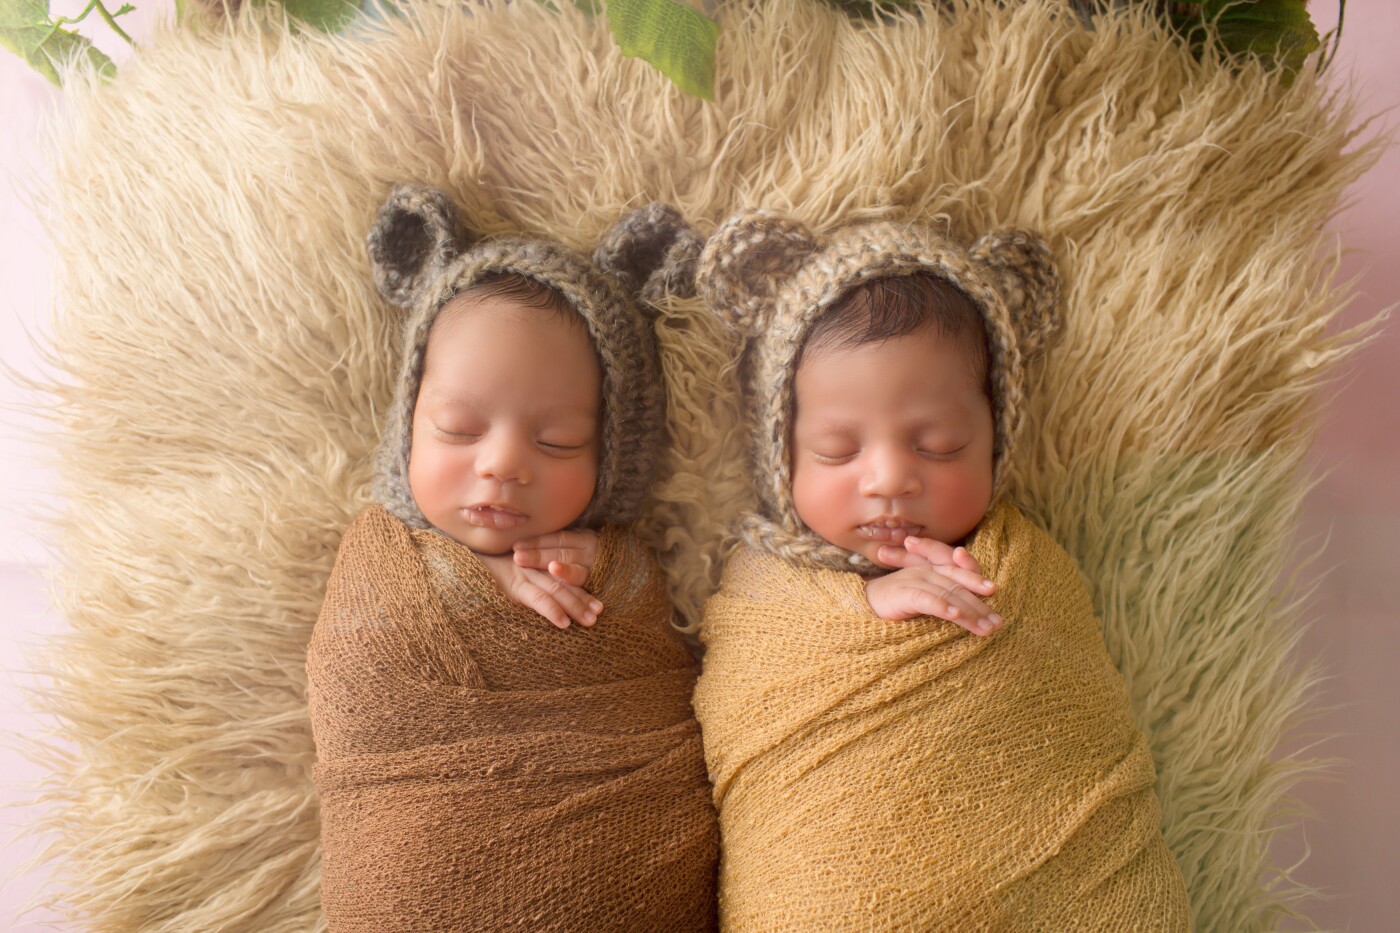 These adorable twin boys were exactly like peas in a pod!   Aren't they the cutest??<br />
All of 25 days of age but posed like 5 day old newbie <3